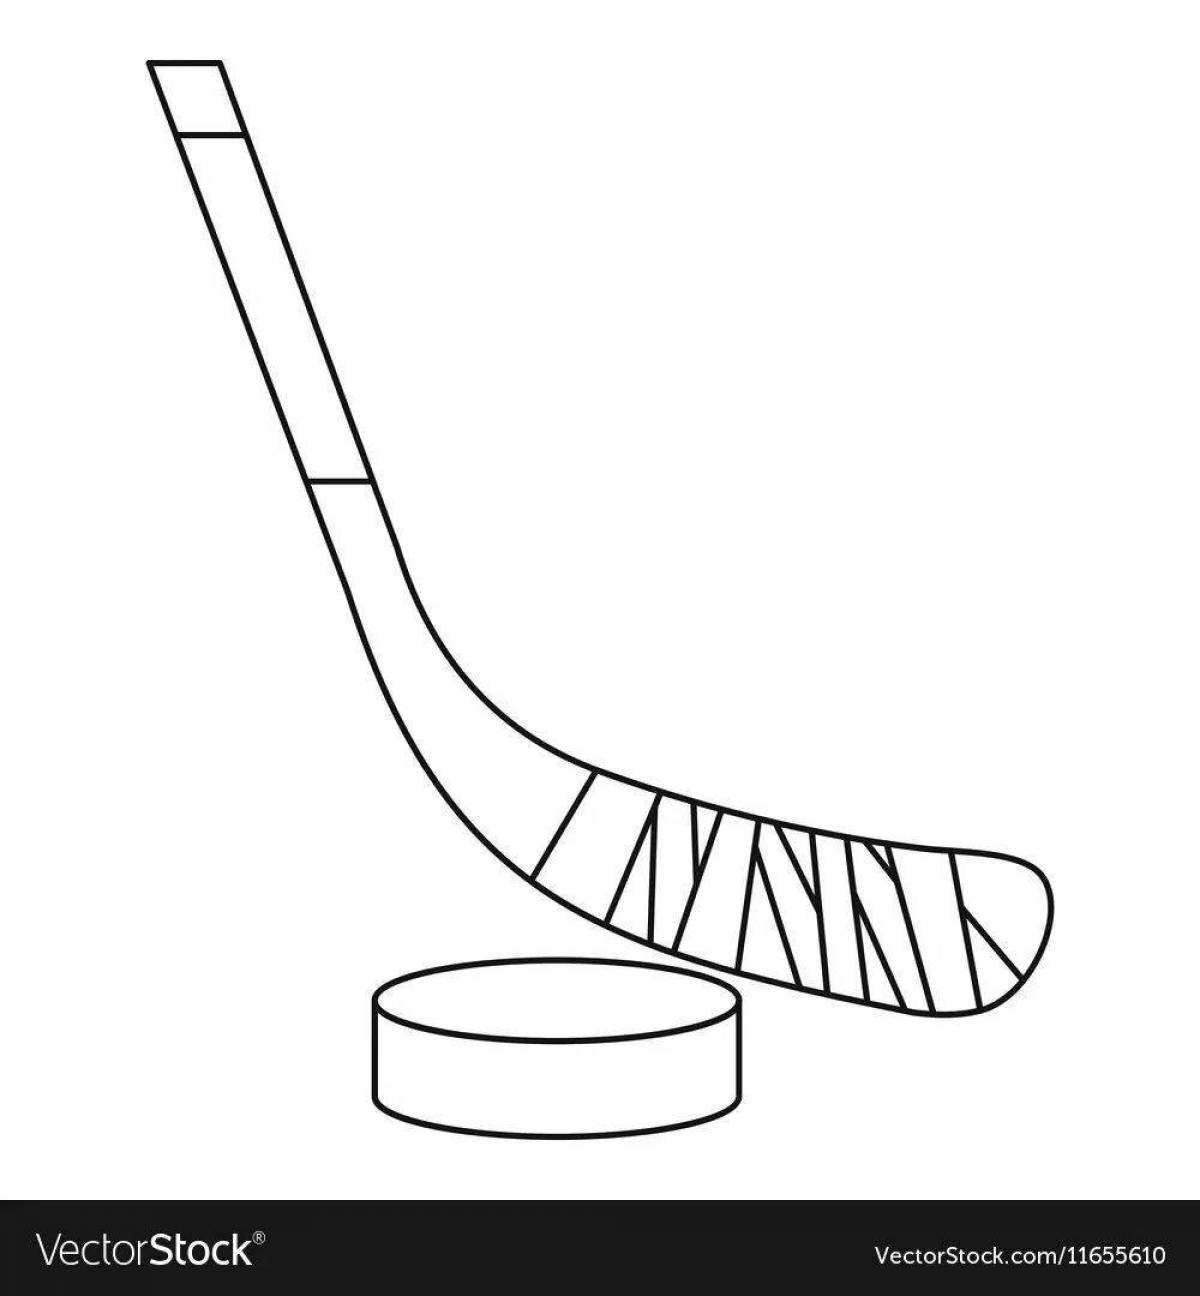 Playful puck coloring page for kids